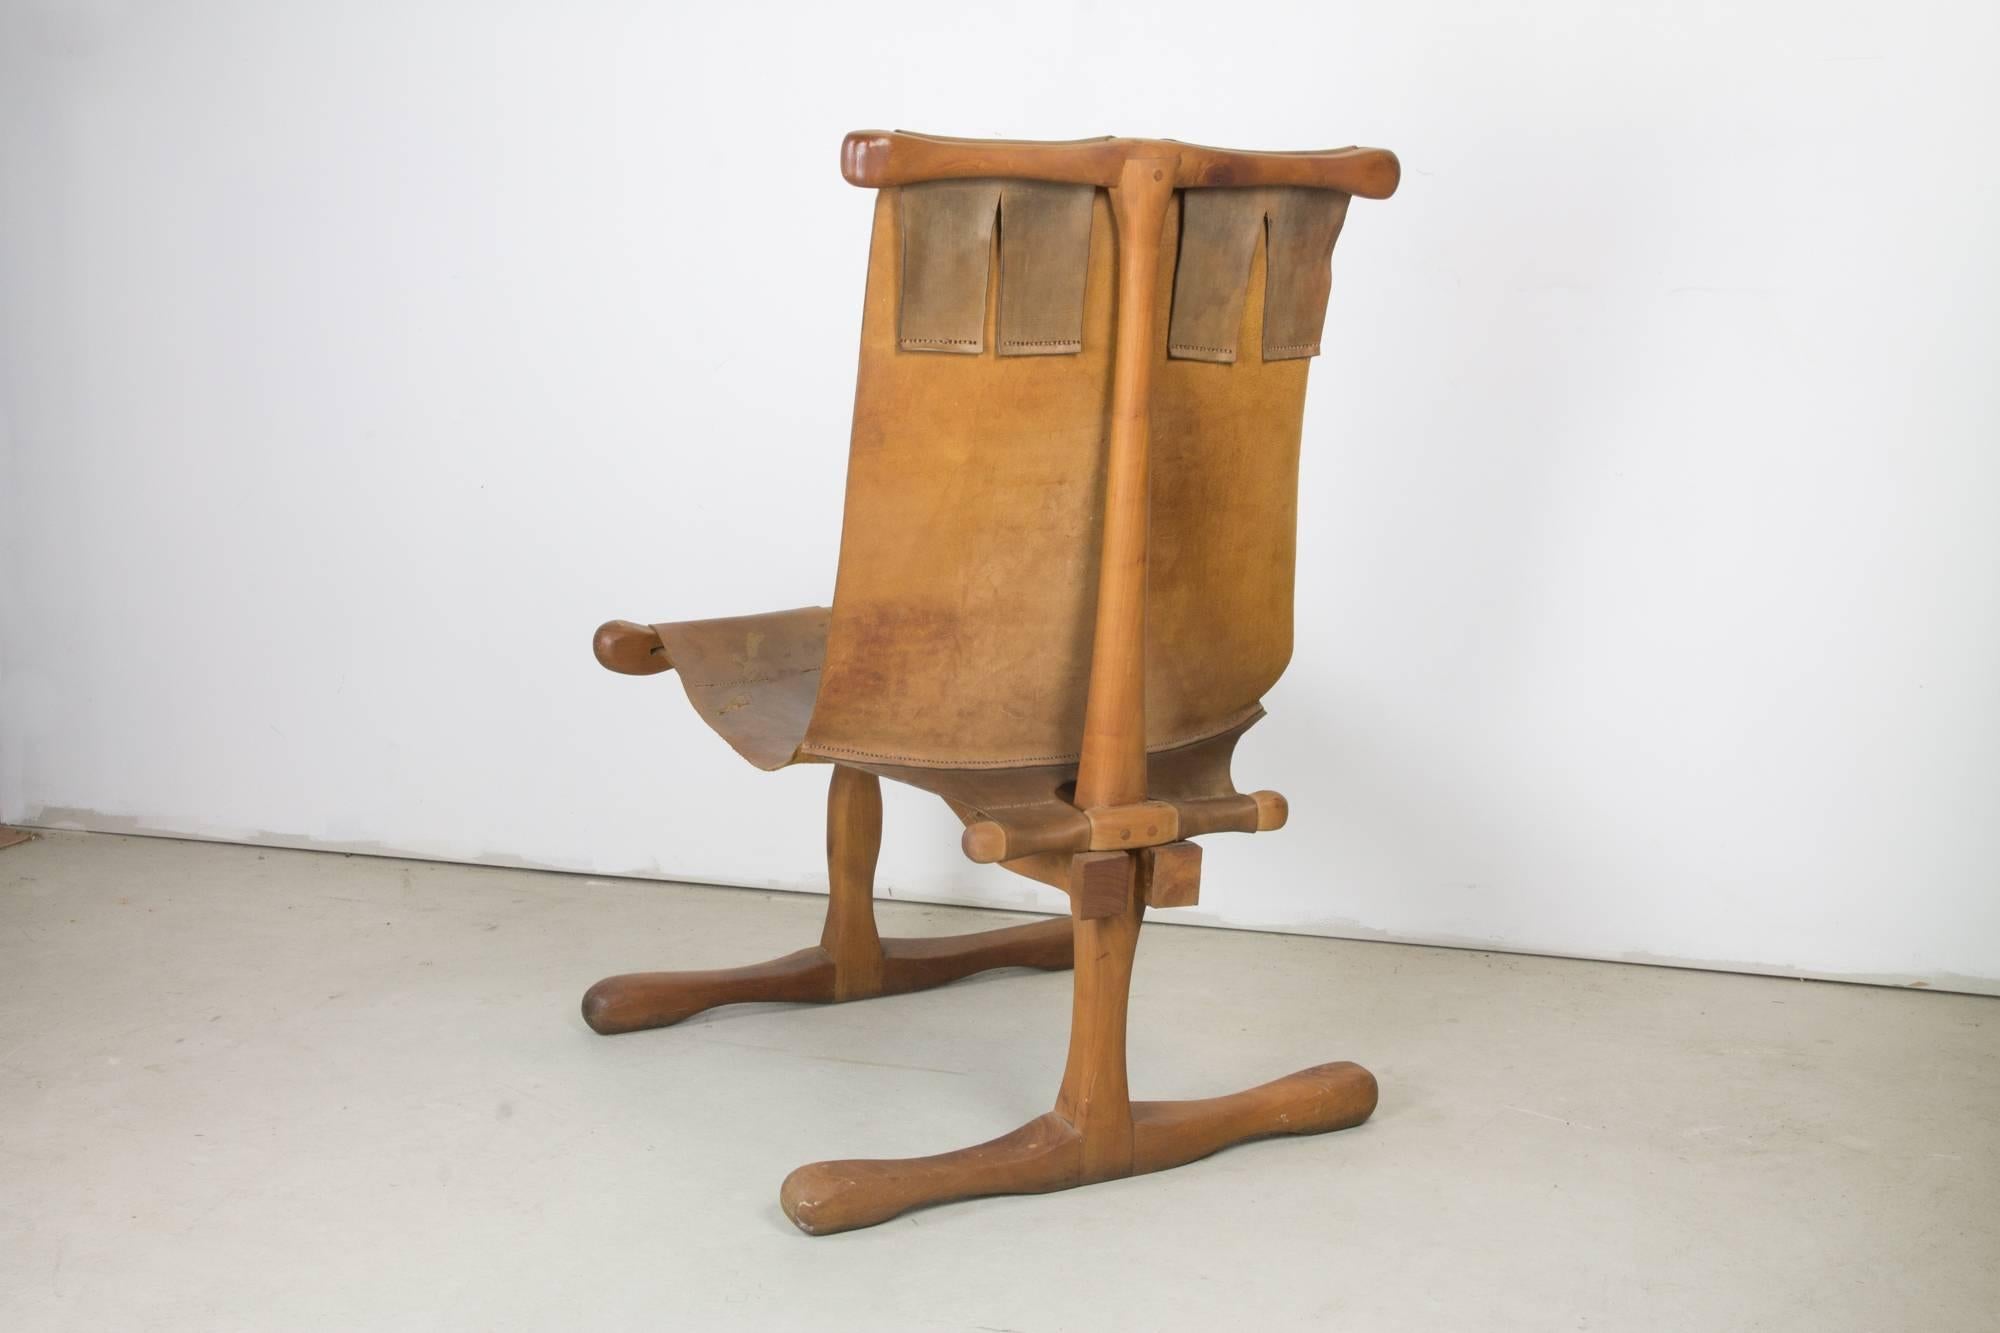 Rare American Studio Craft movement carved and pegged wood frame chair with sled base and robust t-frame construction supporting a broad saddle leather sling. Optional worn hide leather pillow is hung from back with leather strip cord.